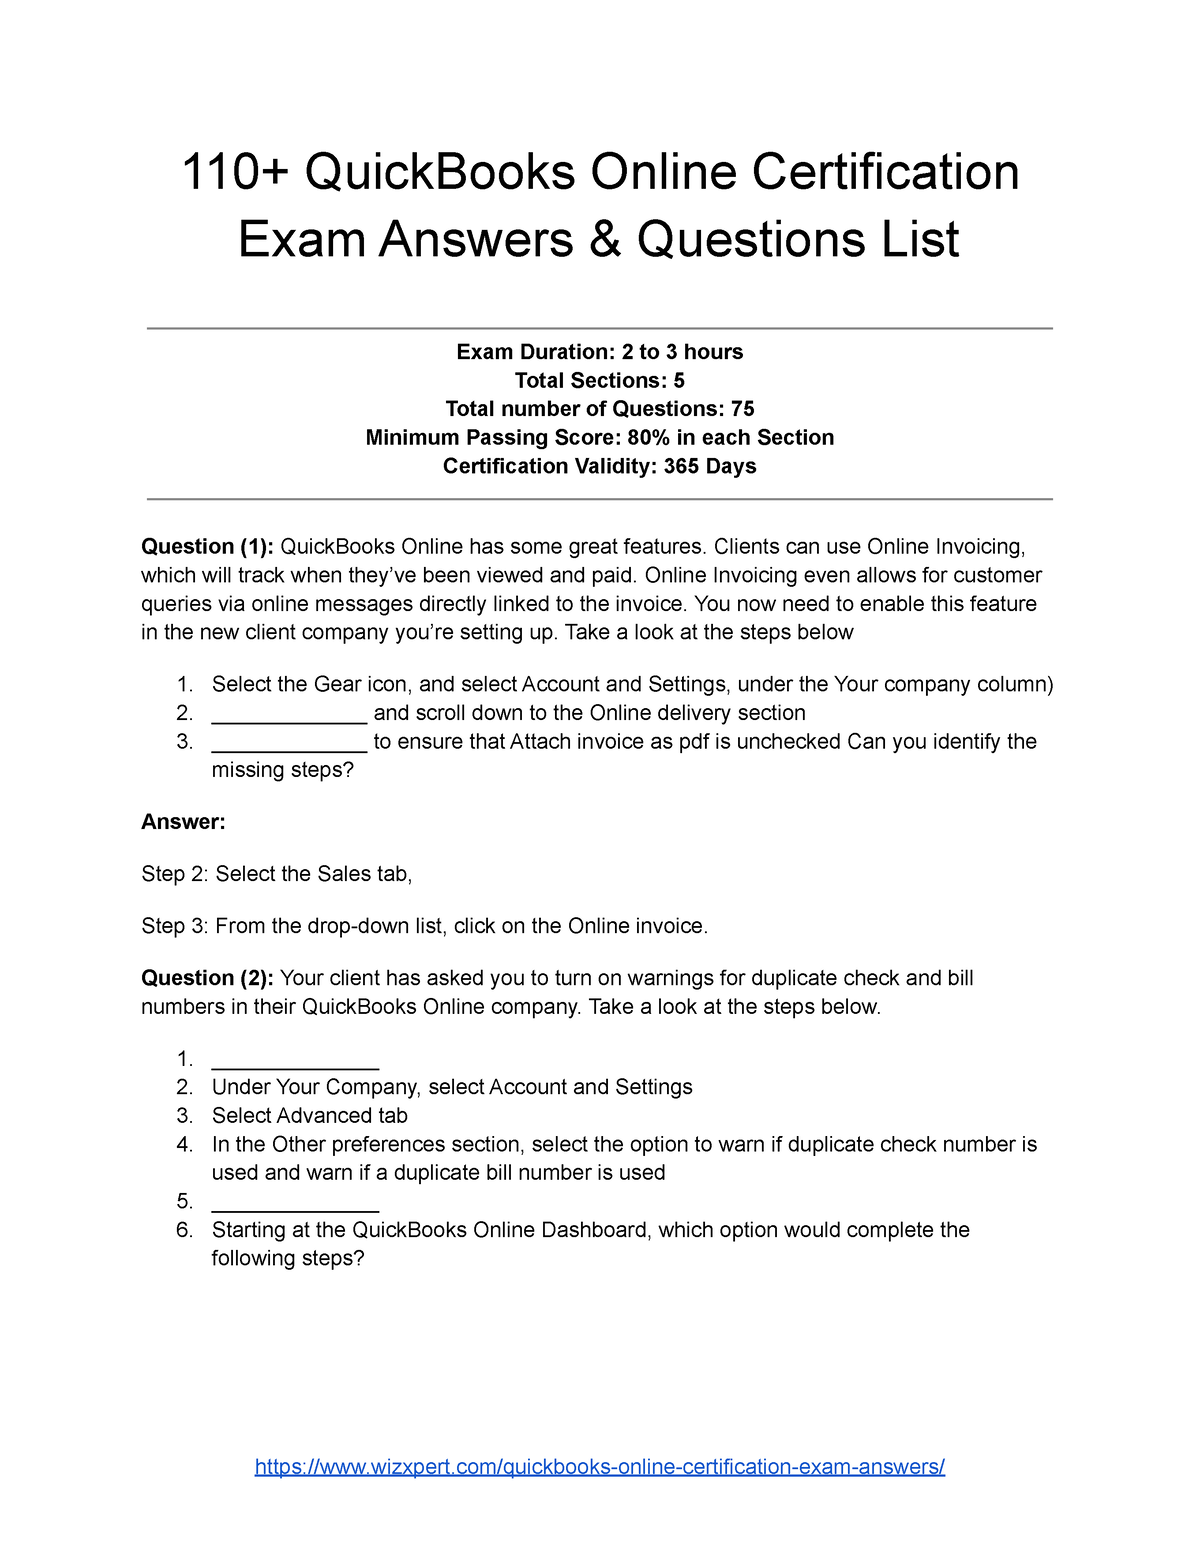 Quick Books Online Certification Exam Answers Questions 110